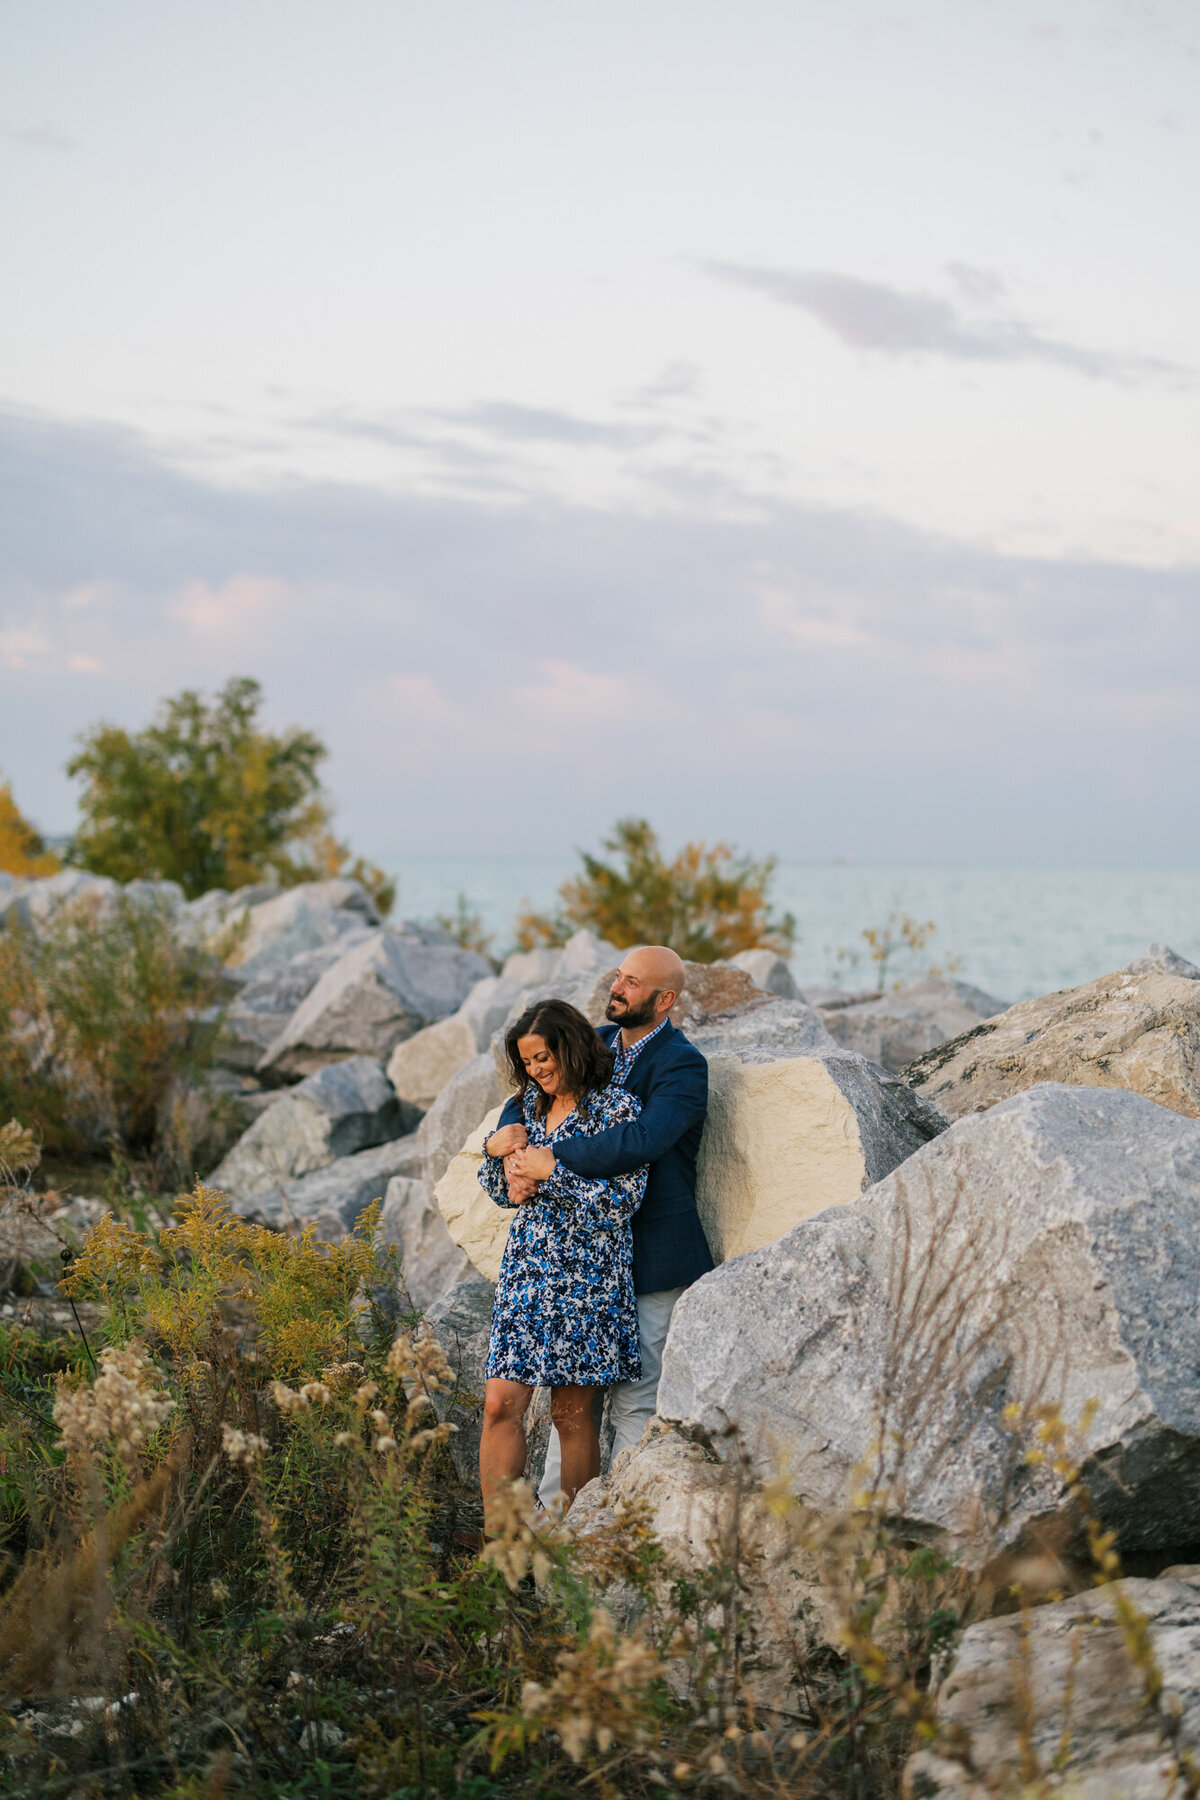 An engagement photo taken at Chicago's Northerly Island in the fall.